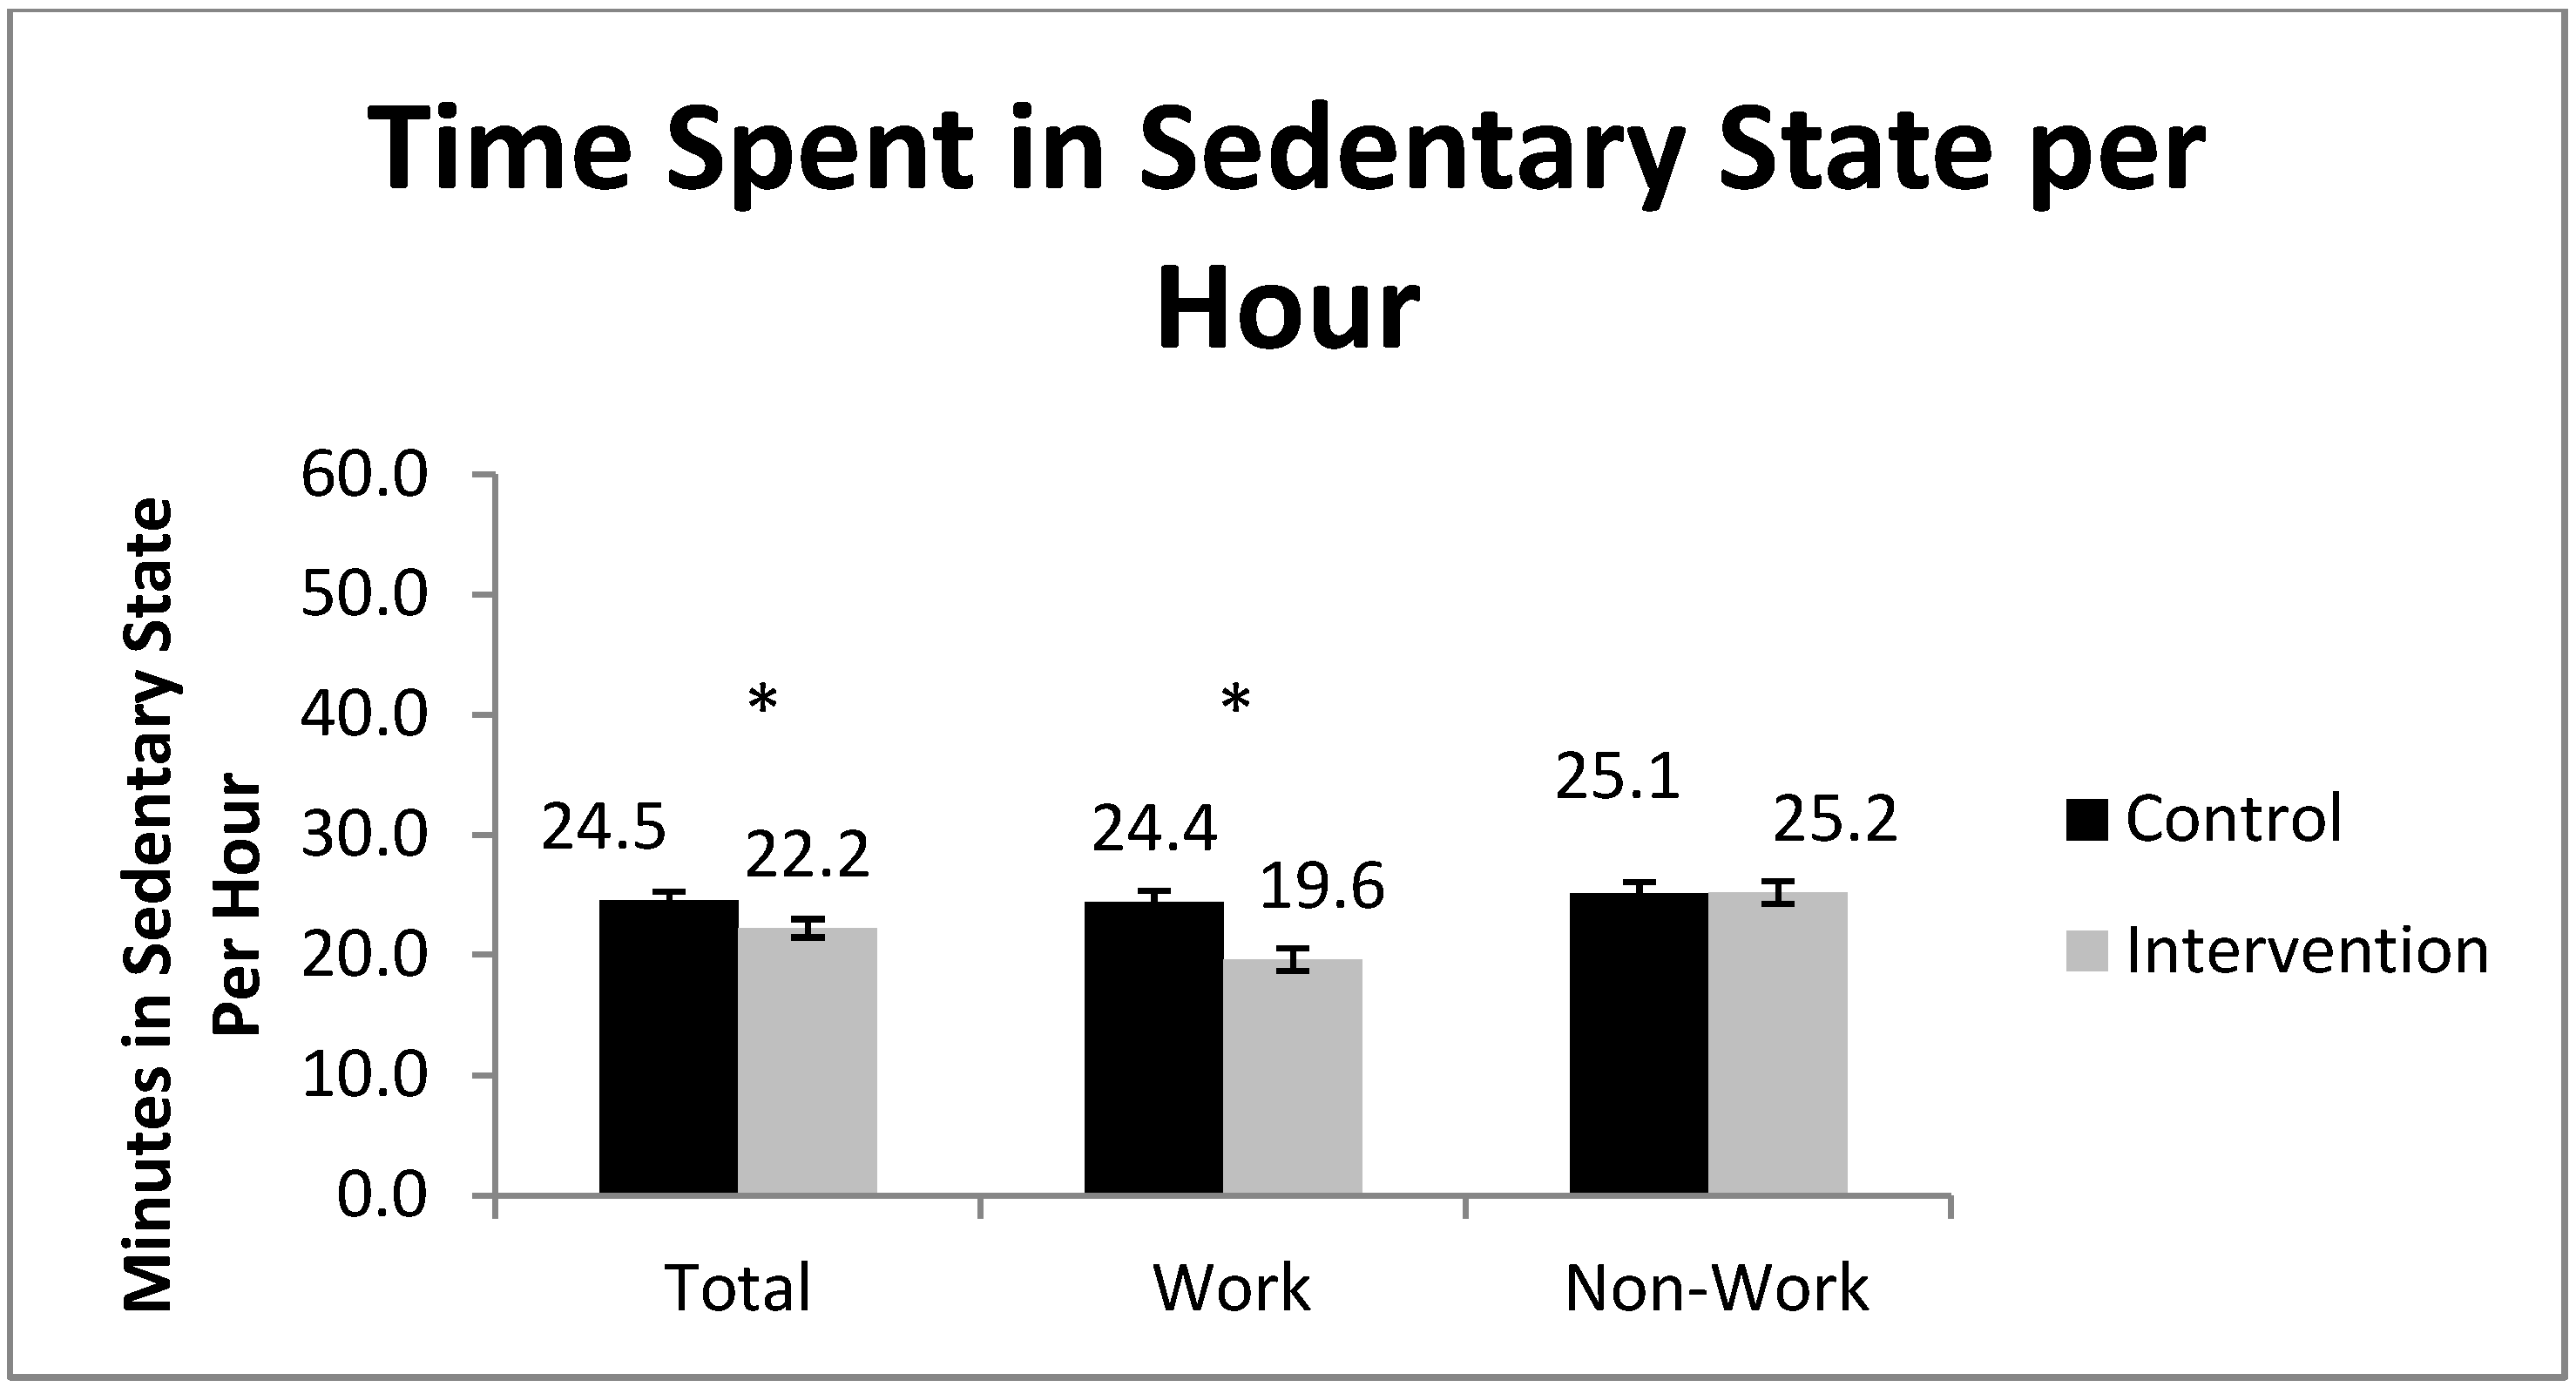 Diet Chart For Sedentary Worker